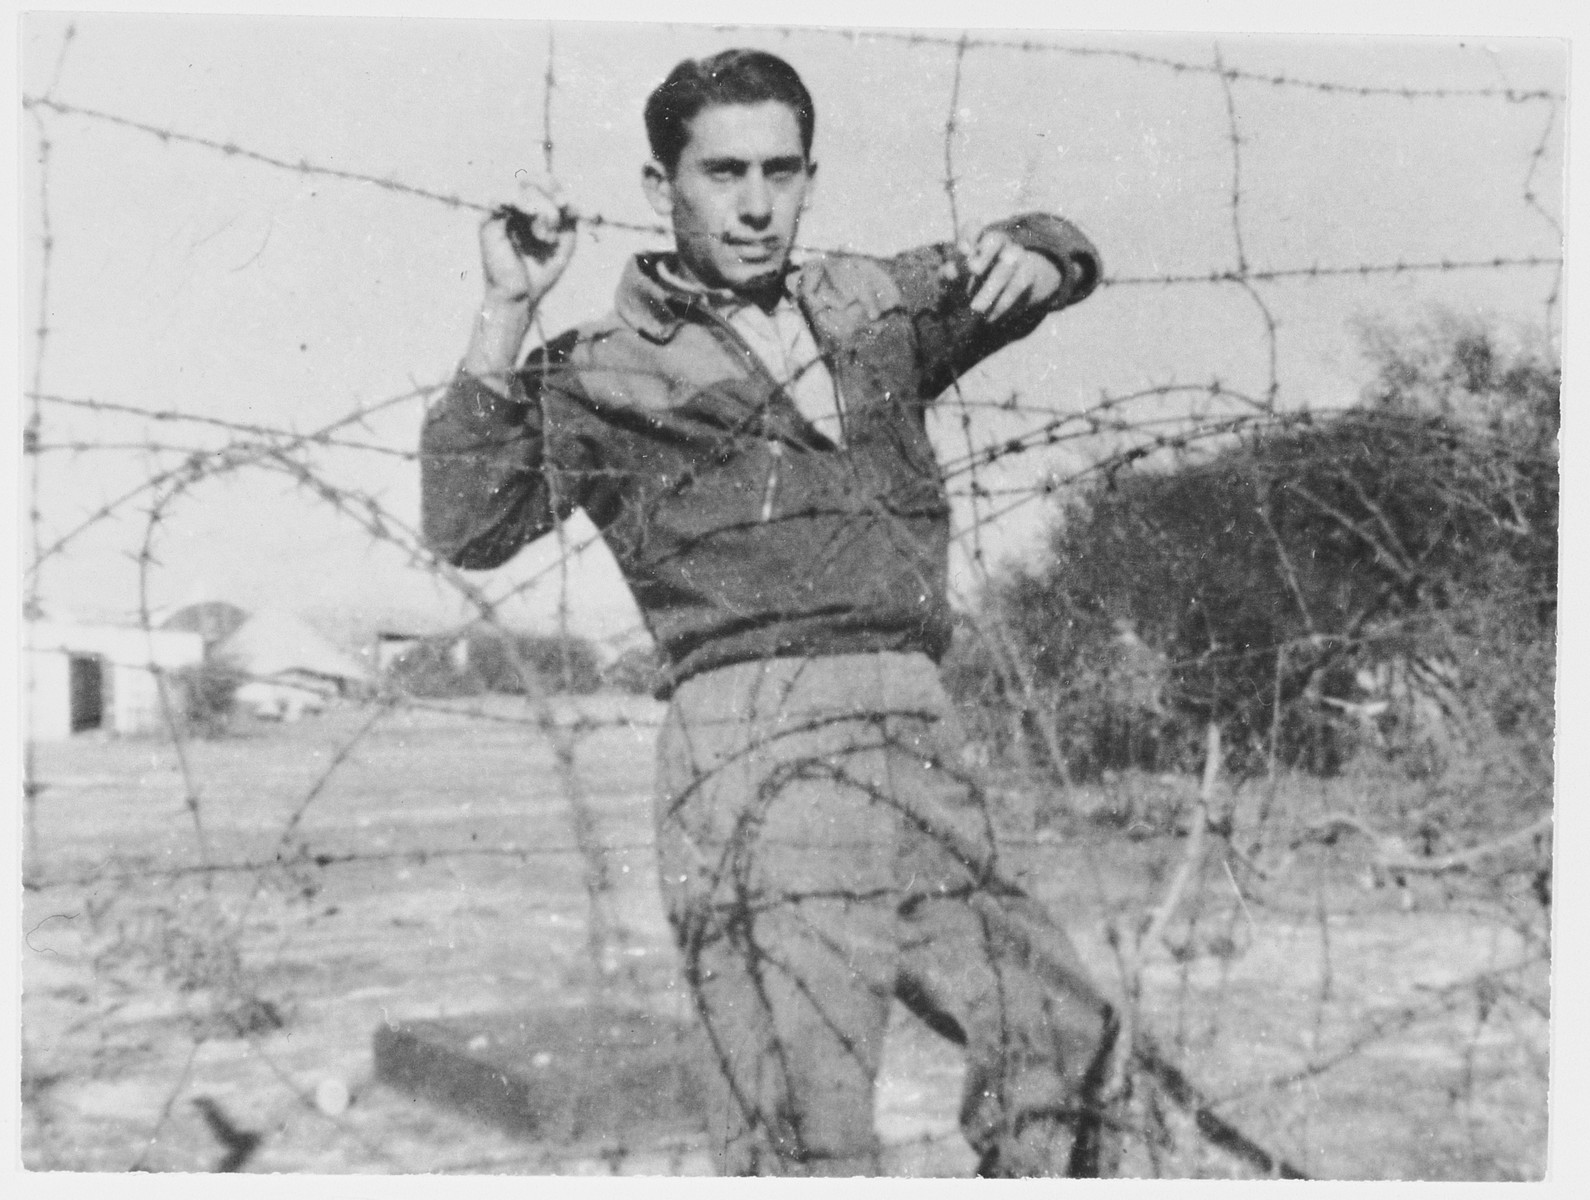 Haim Solomon poses next to the barbed wire fence surrounding the internment camp in Cyprus.